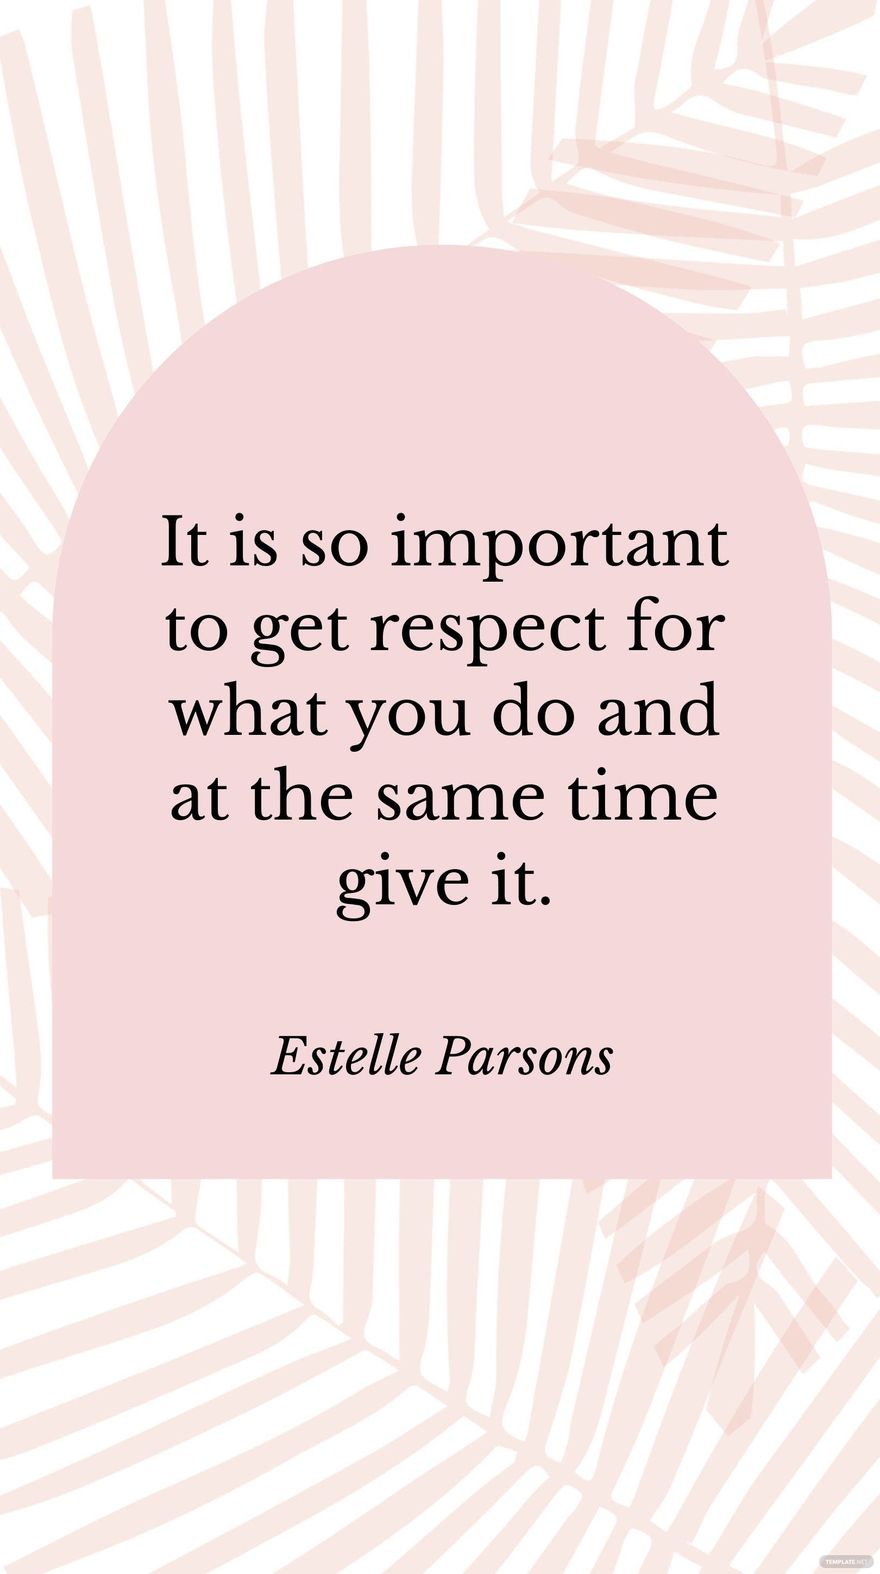 Estelle Parsons - It is so important to get respect for what you do and at the same time give it.